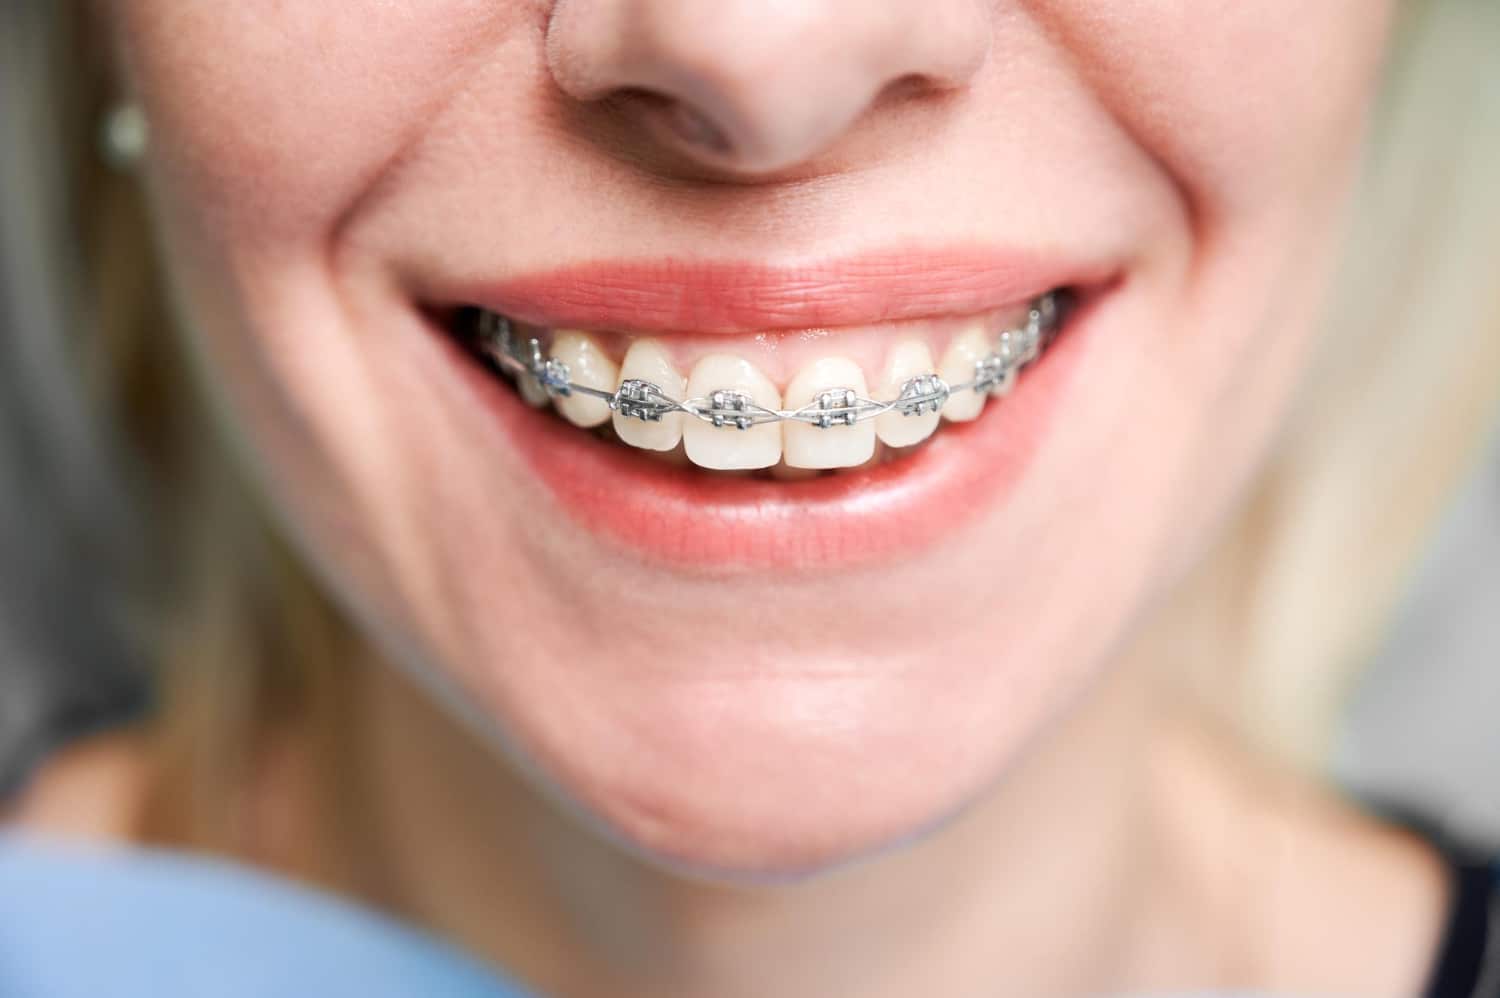 Braces-Friendly Diet: To Include and Avoid for Best Results